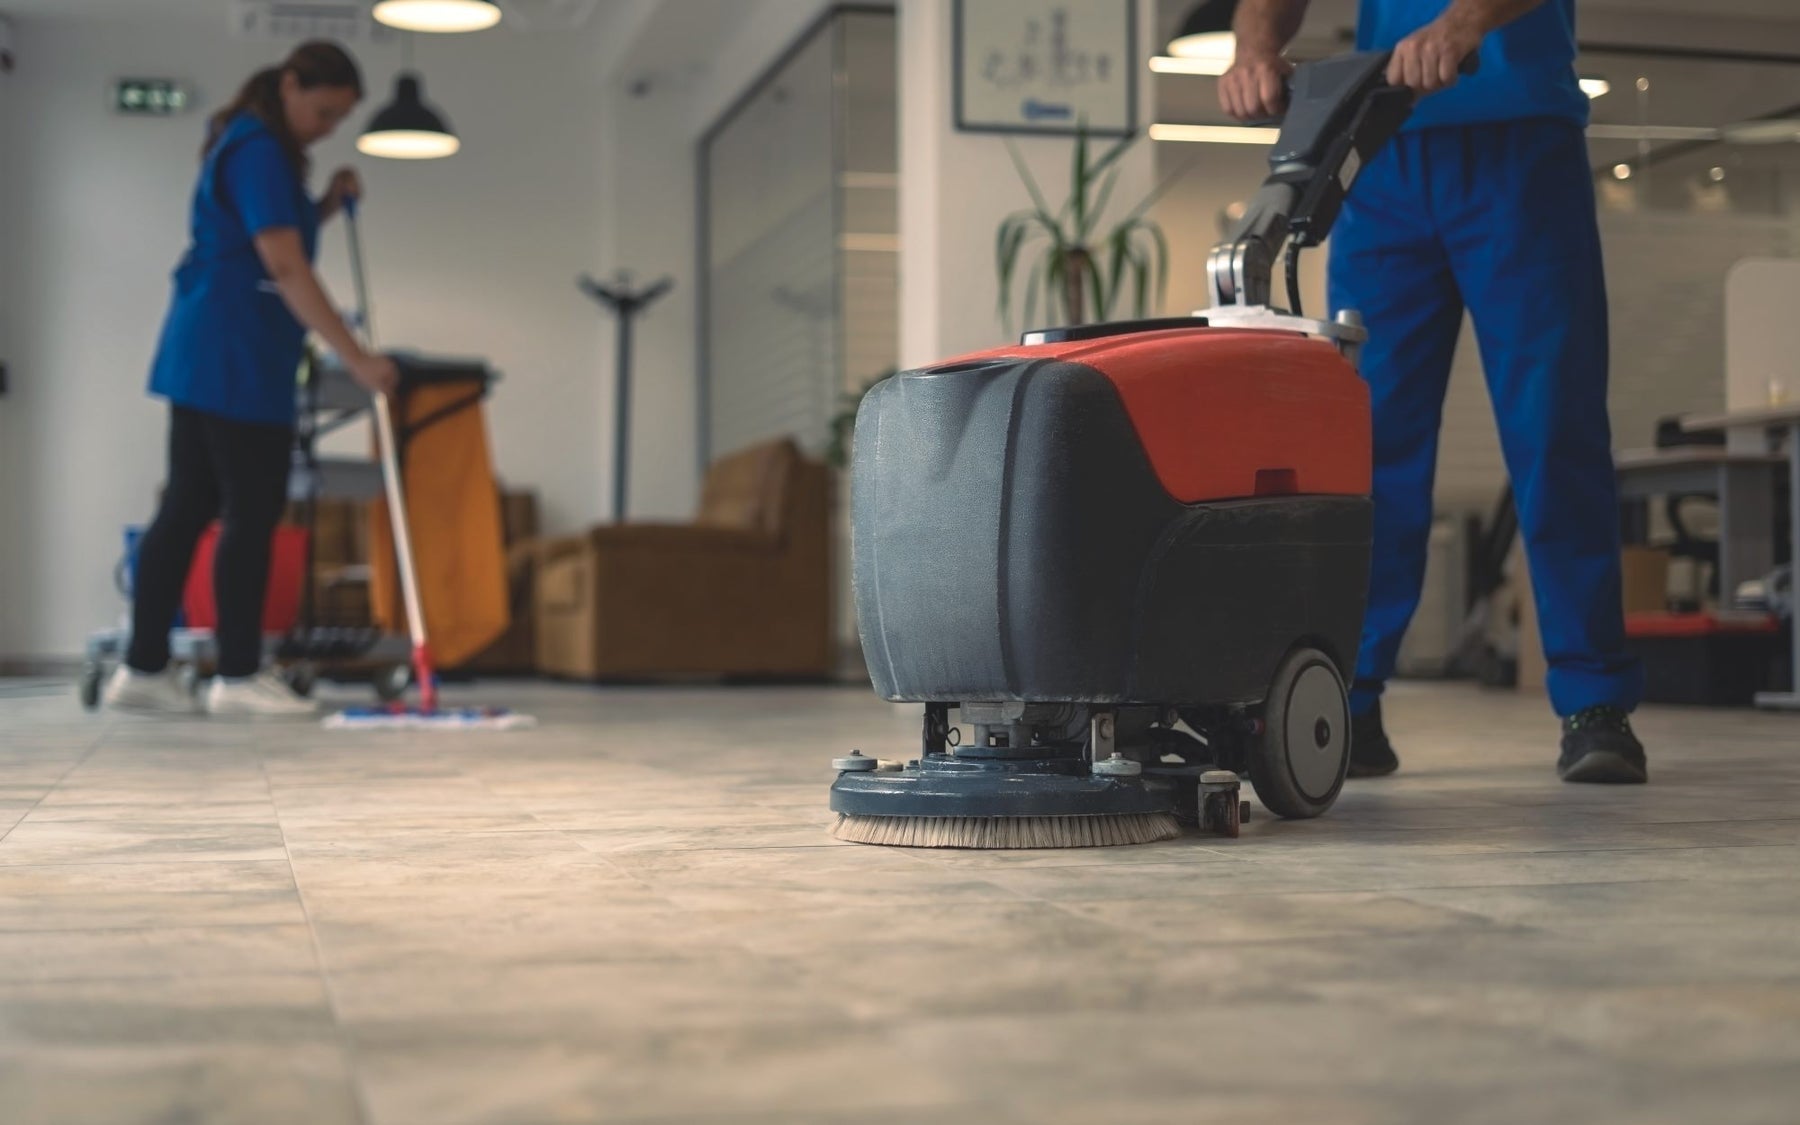 The Latest Trends in Commercial Cleaning Equipment